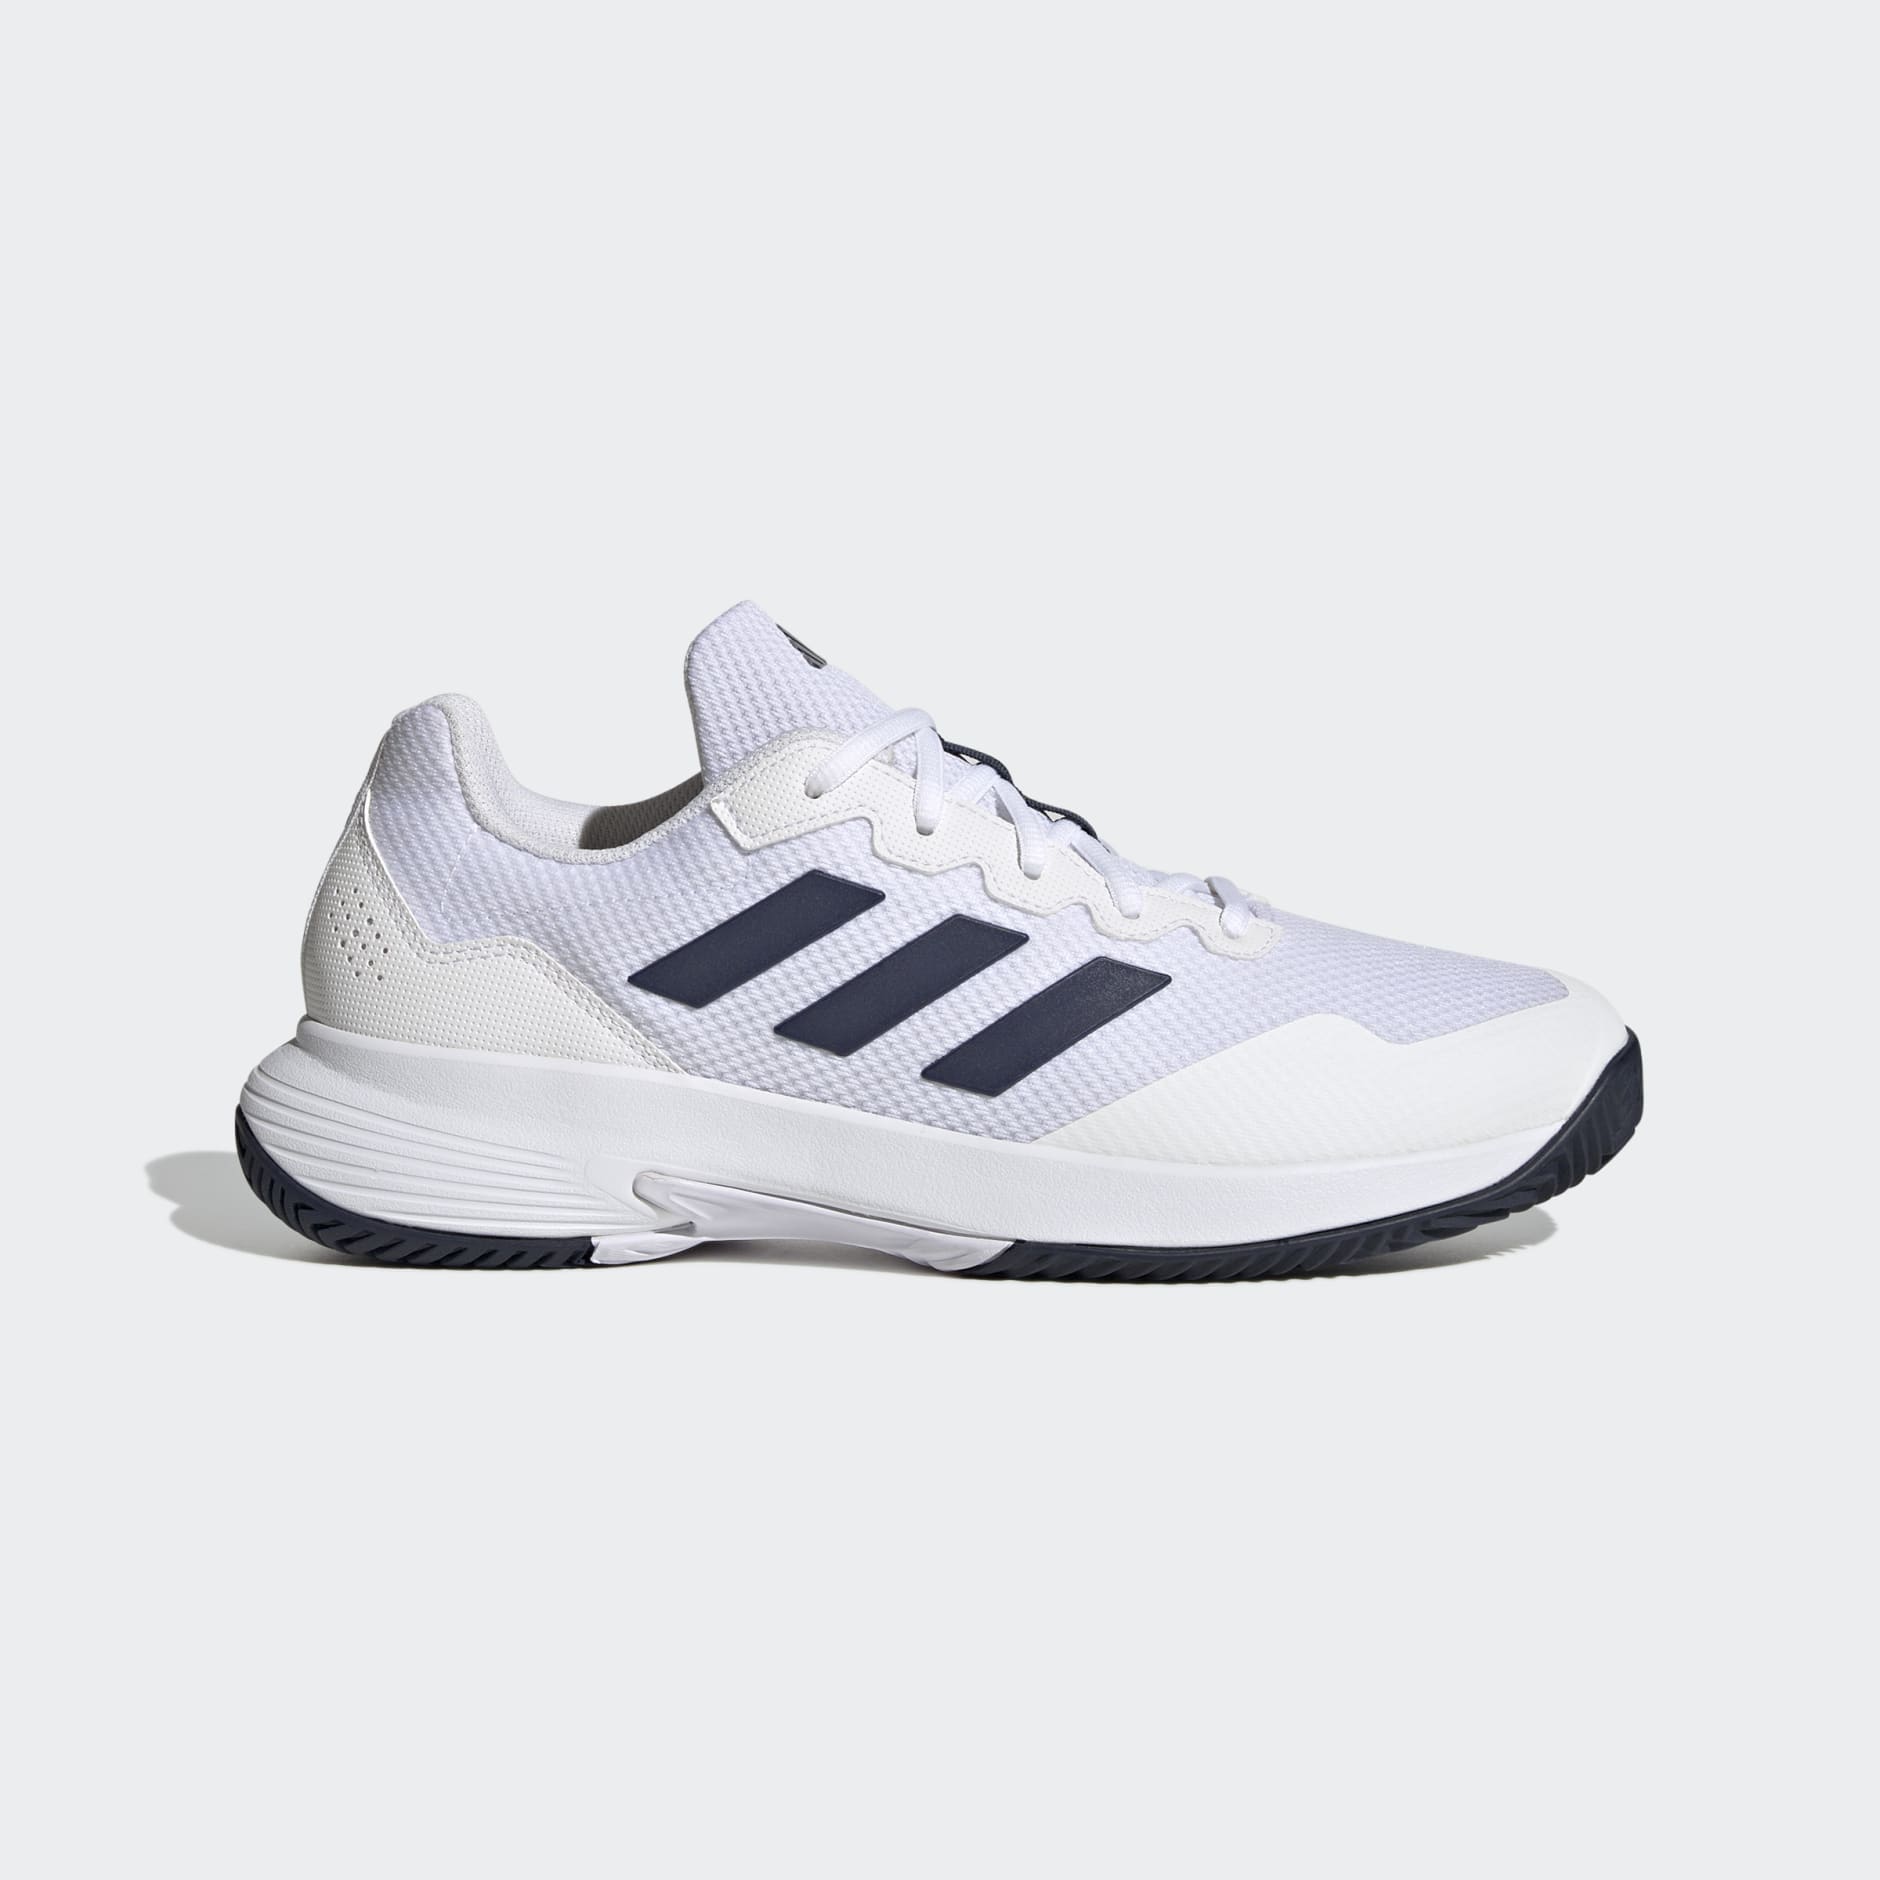 Shoes - Gamecourt 2.0 Tennis Shoes - White | adidas South Africa